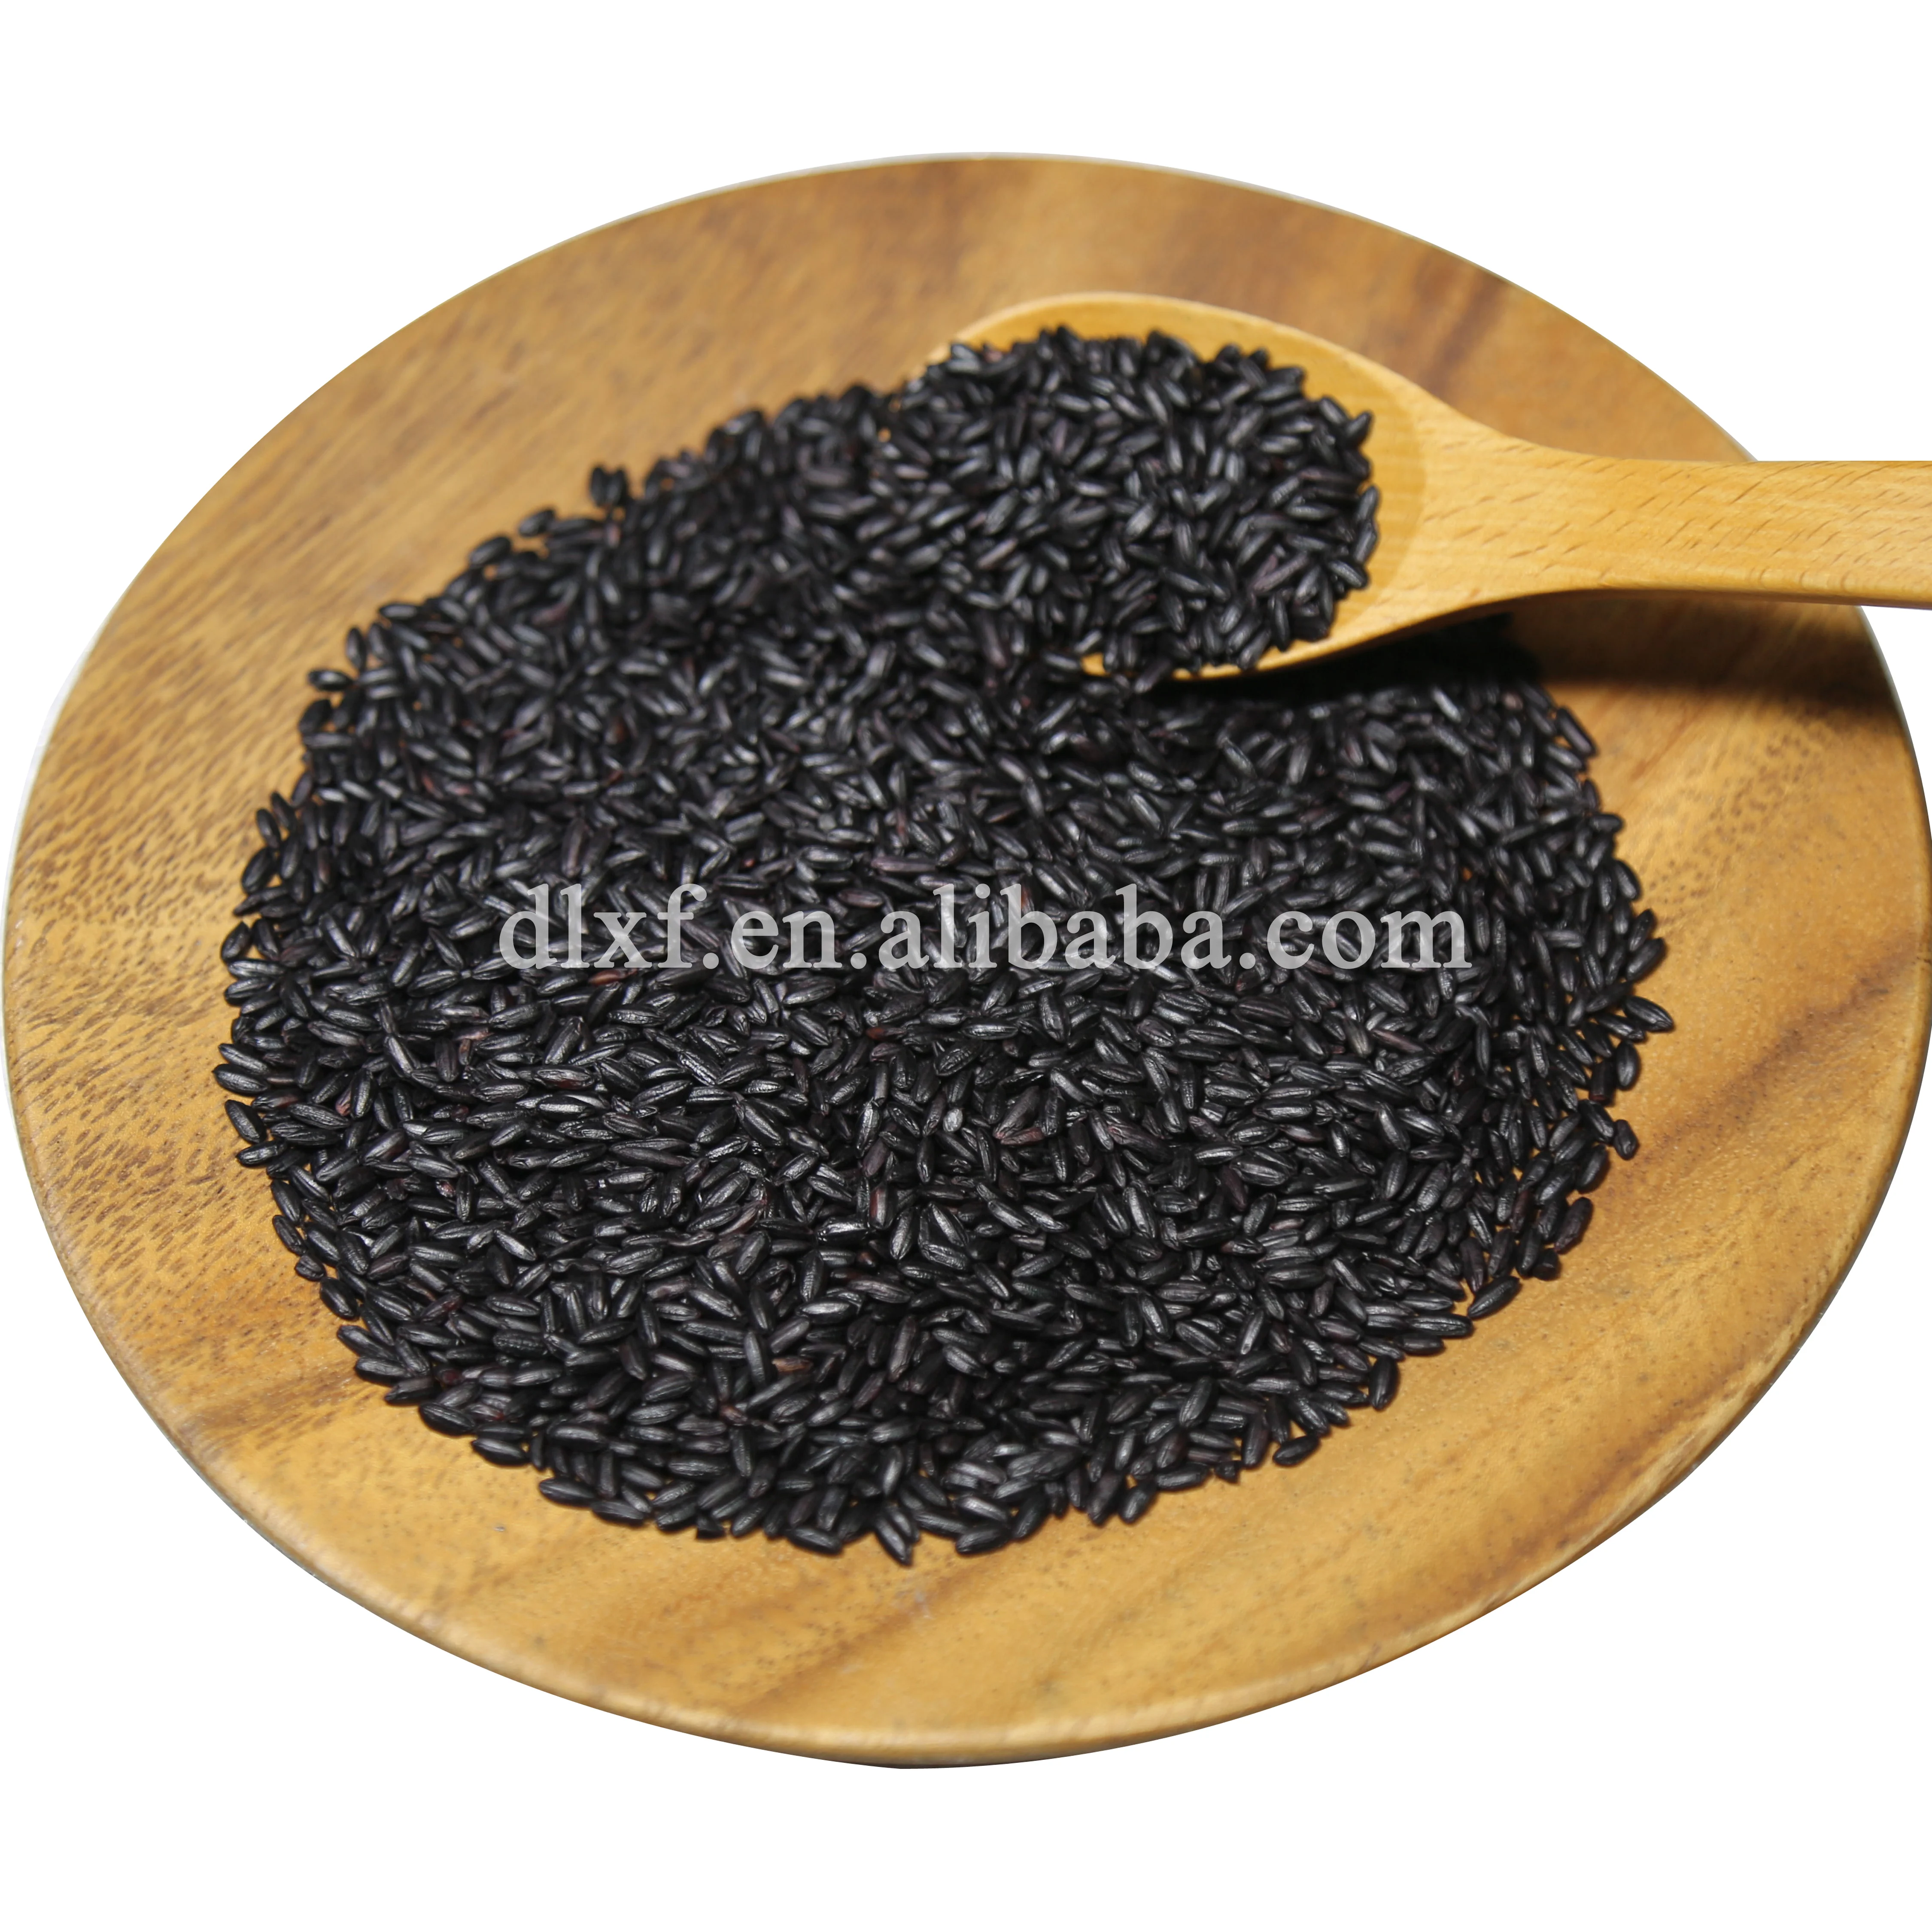 
hot sale china parboiled rice black rice steamed rice for sale 